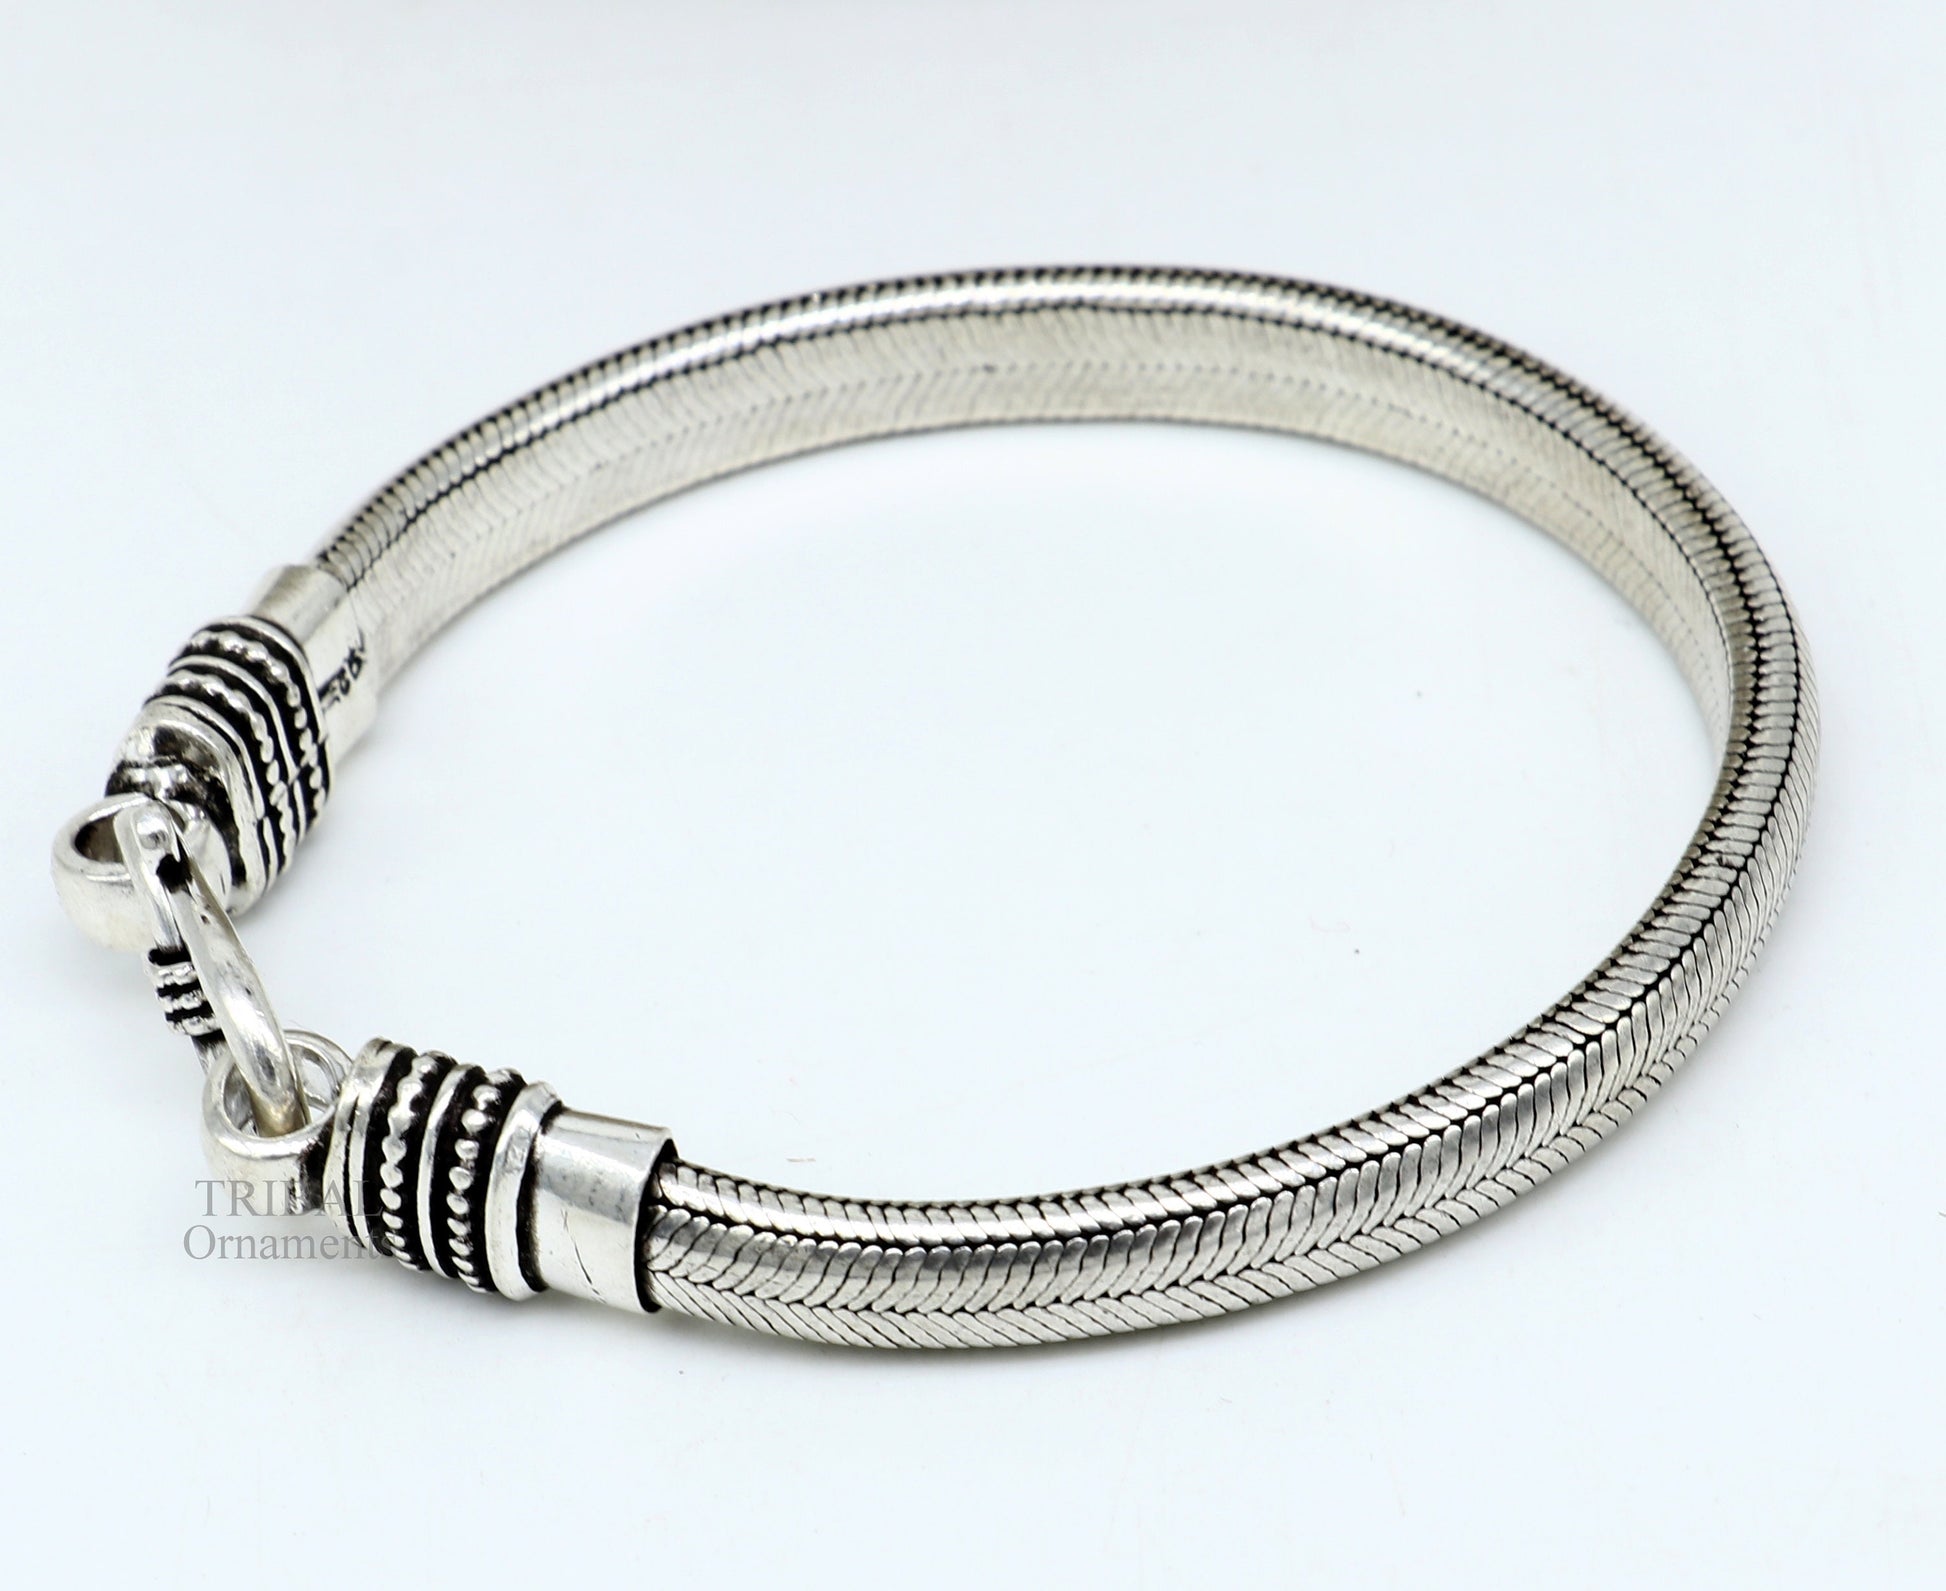 7mm 8" solid 925 sterling silver handmade snake chain heavy customized D shape half round bracelet, personalized gifting jewelry nsbr250 - TRIBAL ORNAMENTS